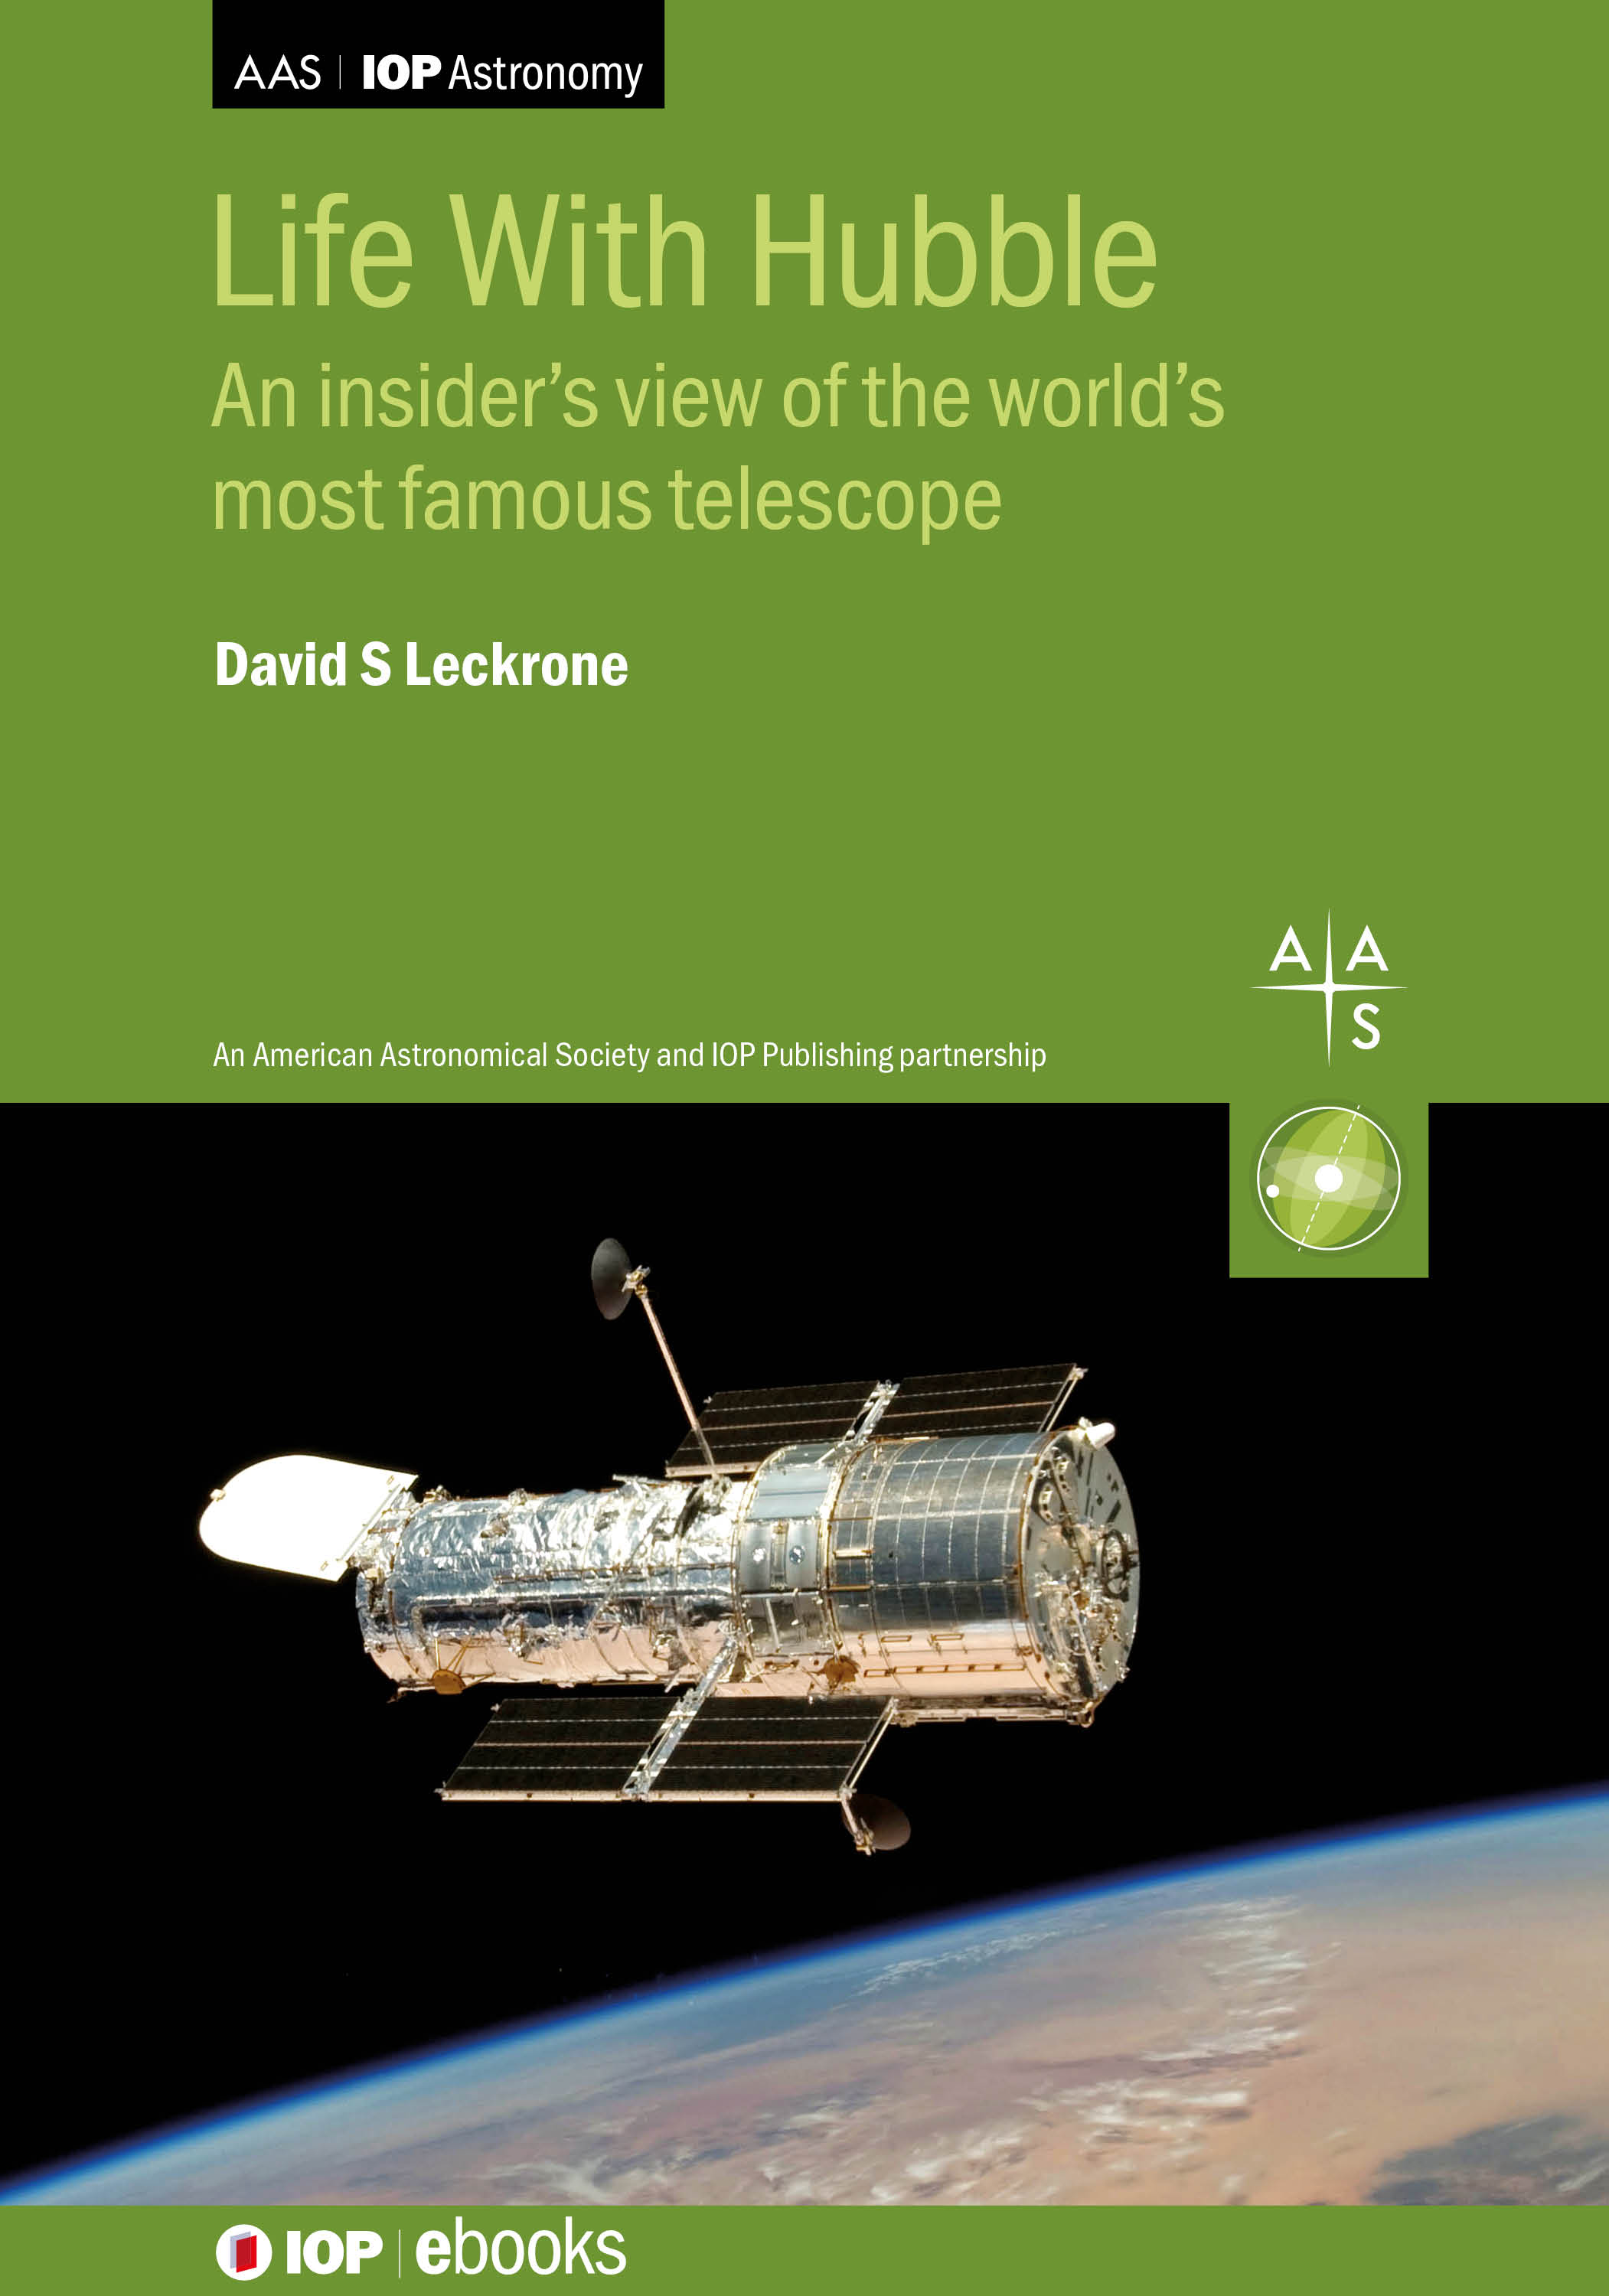 Life with Hubble by David Leckrone